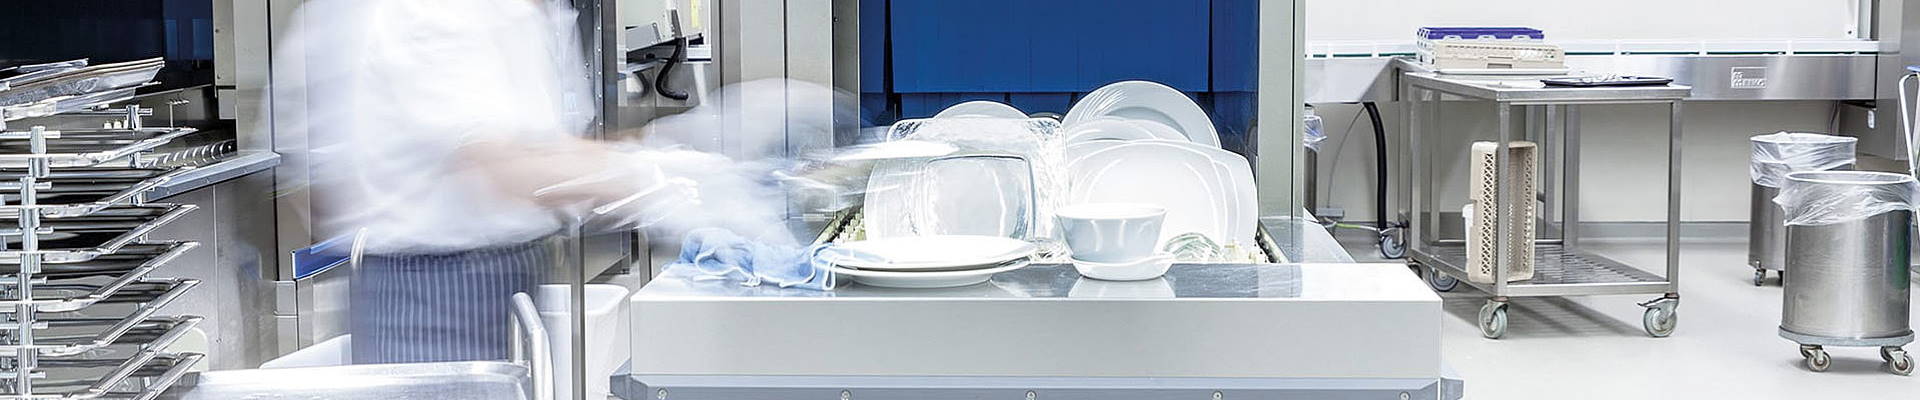 Commercial Dishwasher Repair in Orange County CA